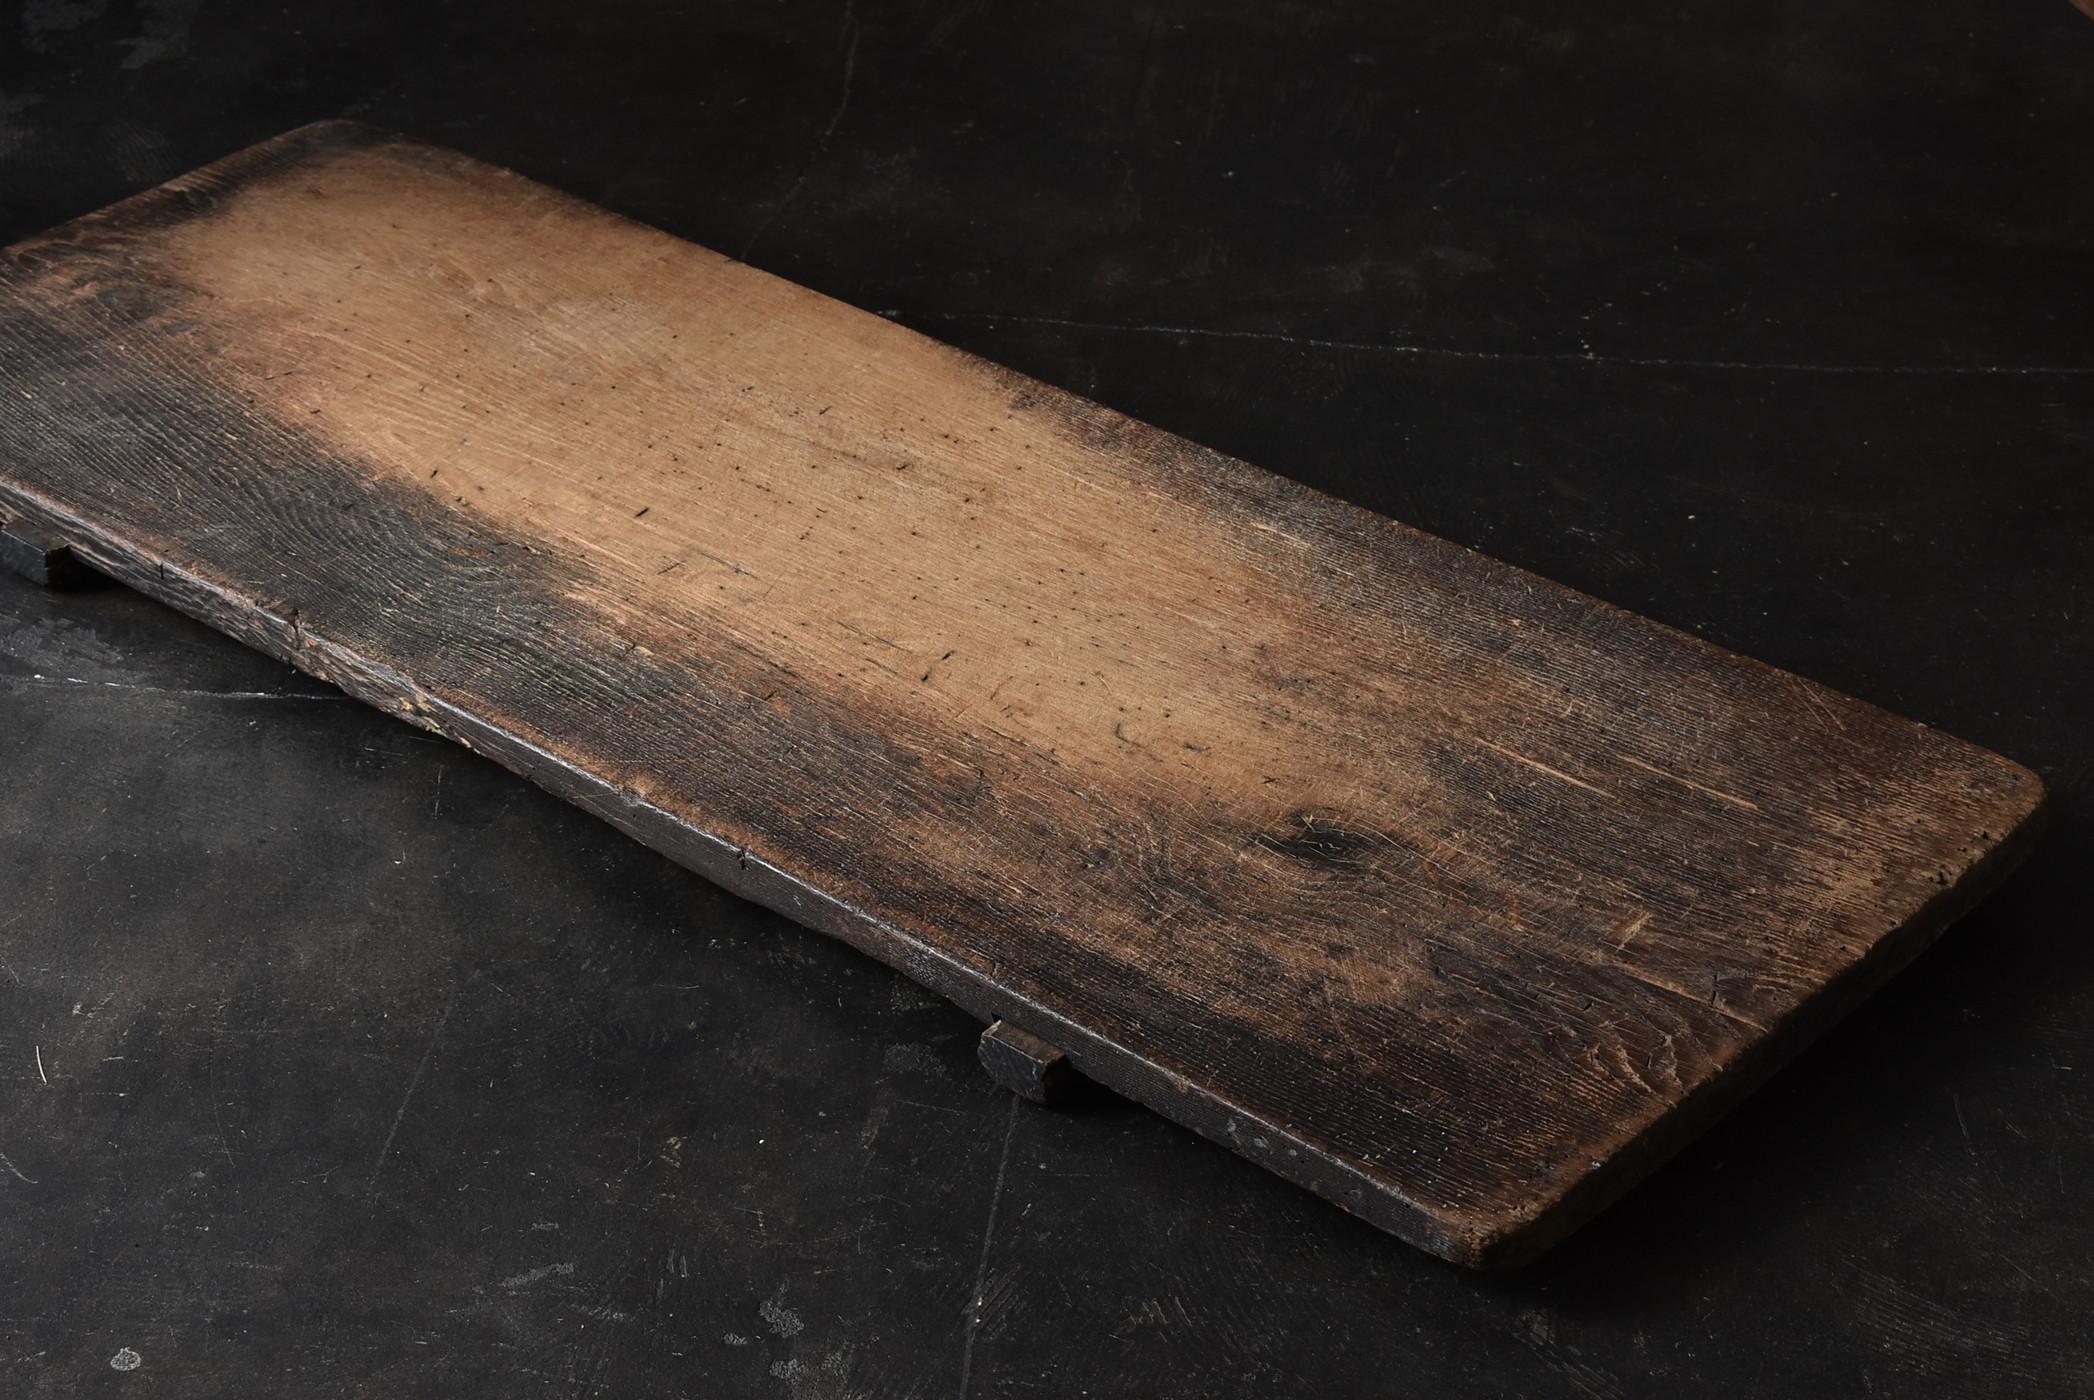 19th-20th Century Japanese Old Antique wooden Boards like Monochrome Paintings 11